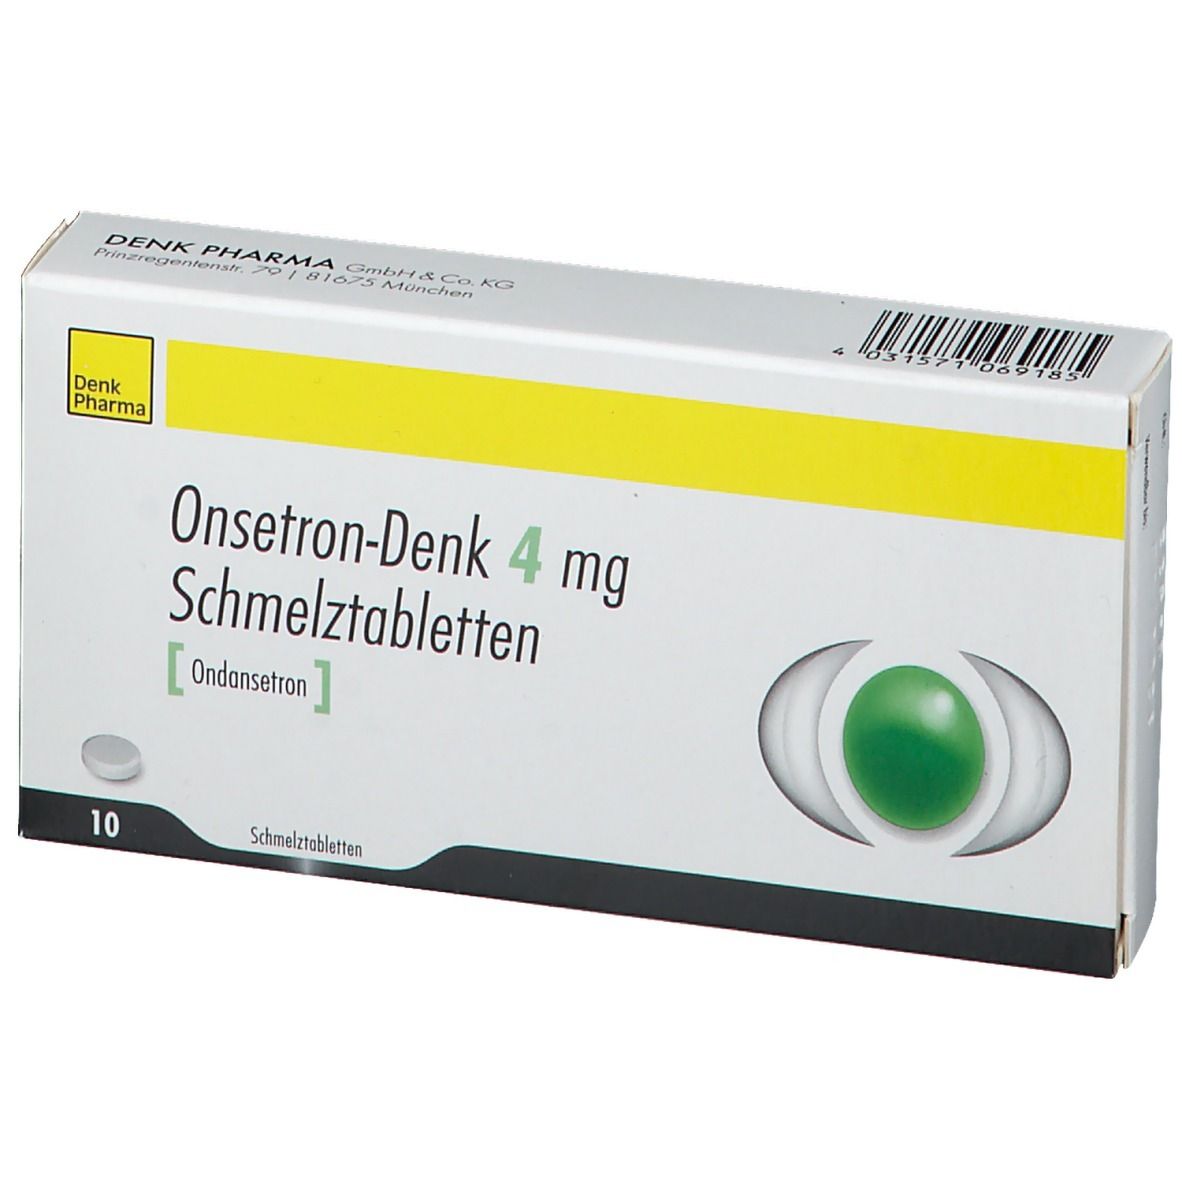 Onsetron-Denk 4 mg